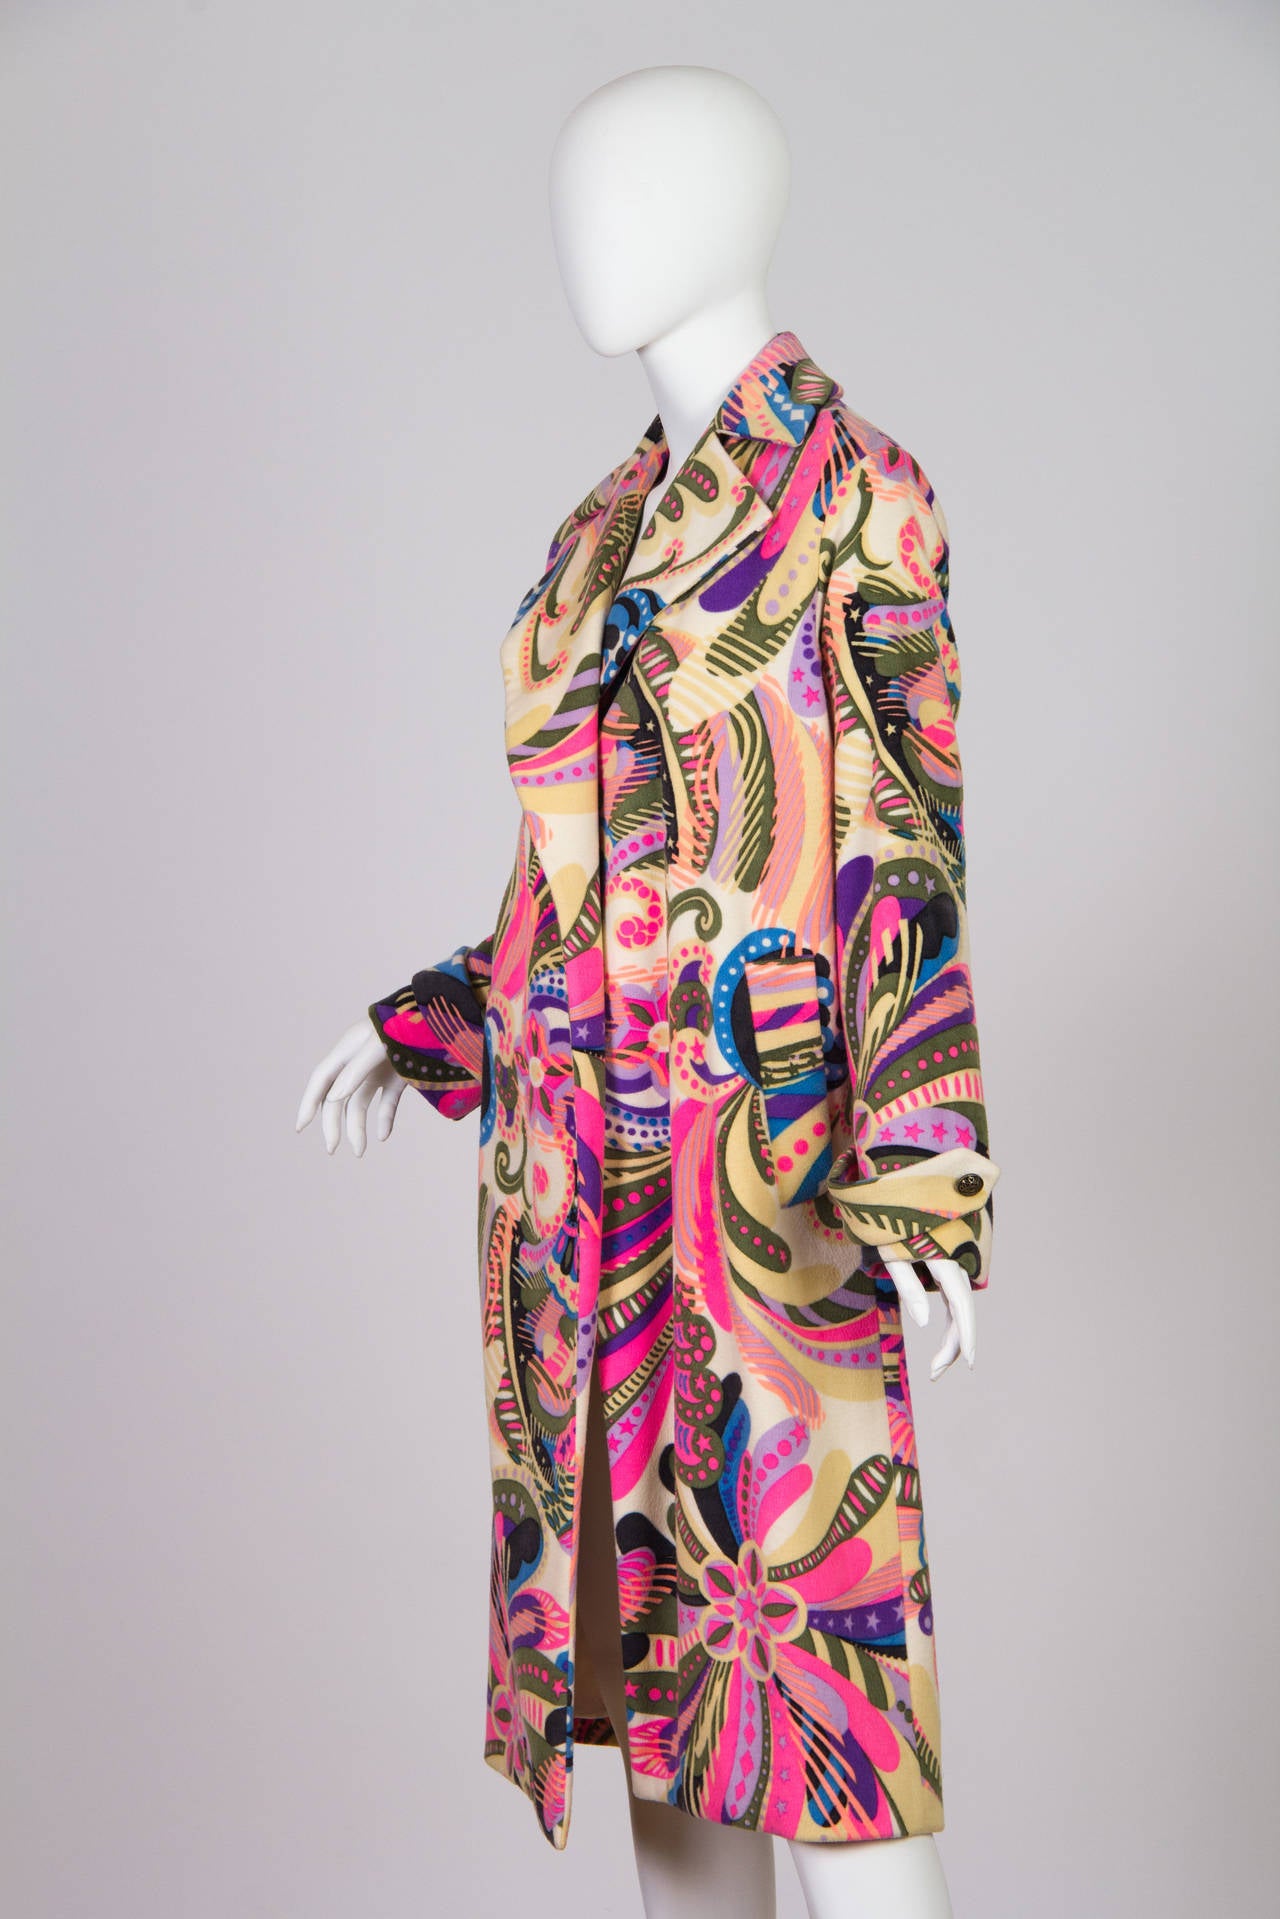 Women's or Men's Fall 2002 ready to wear Gianni Versace Couture Coat